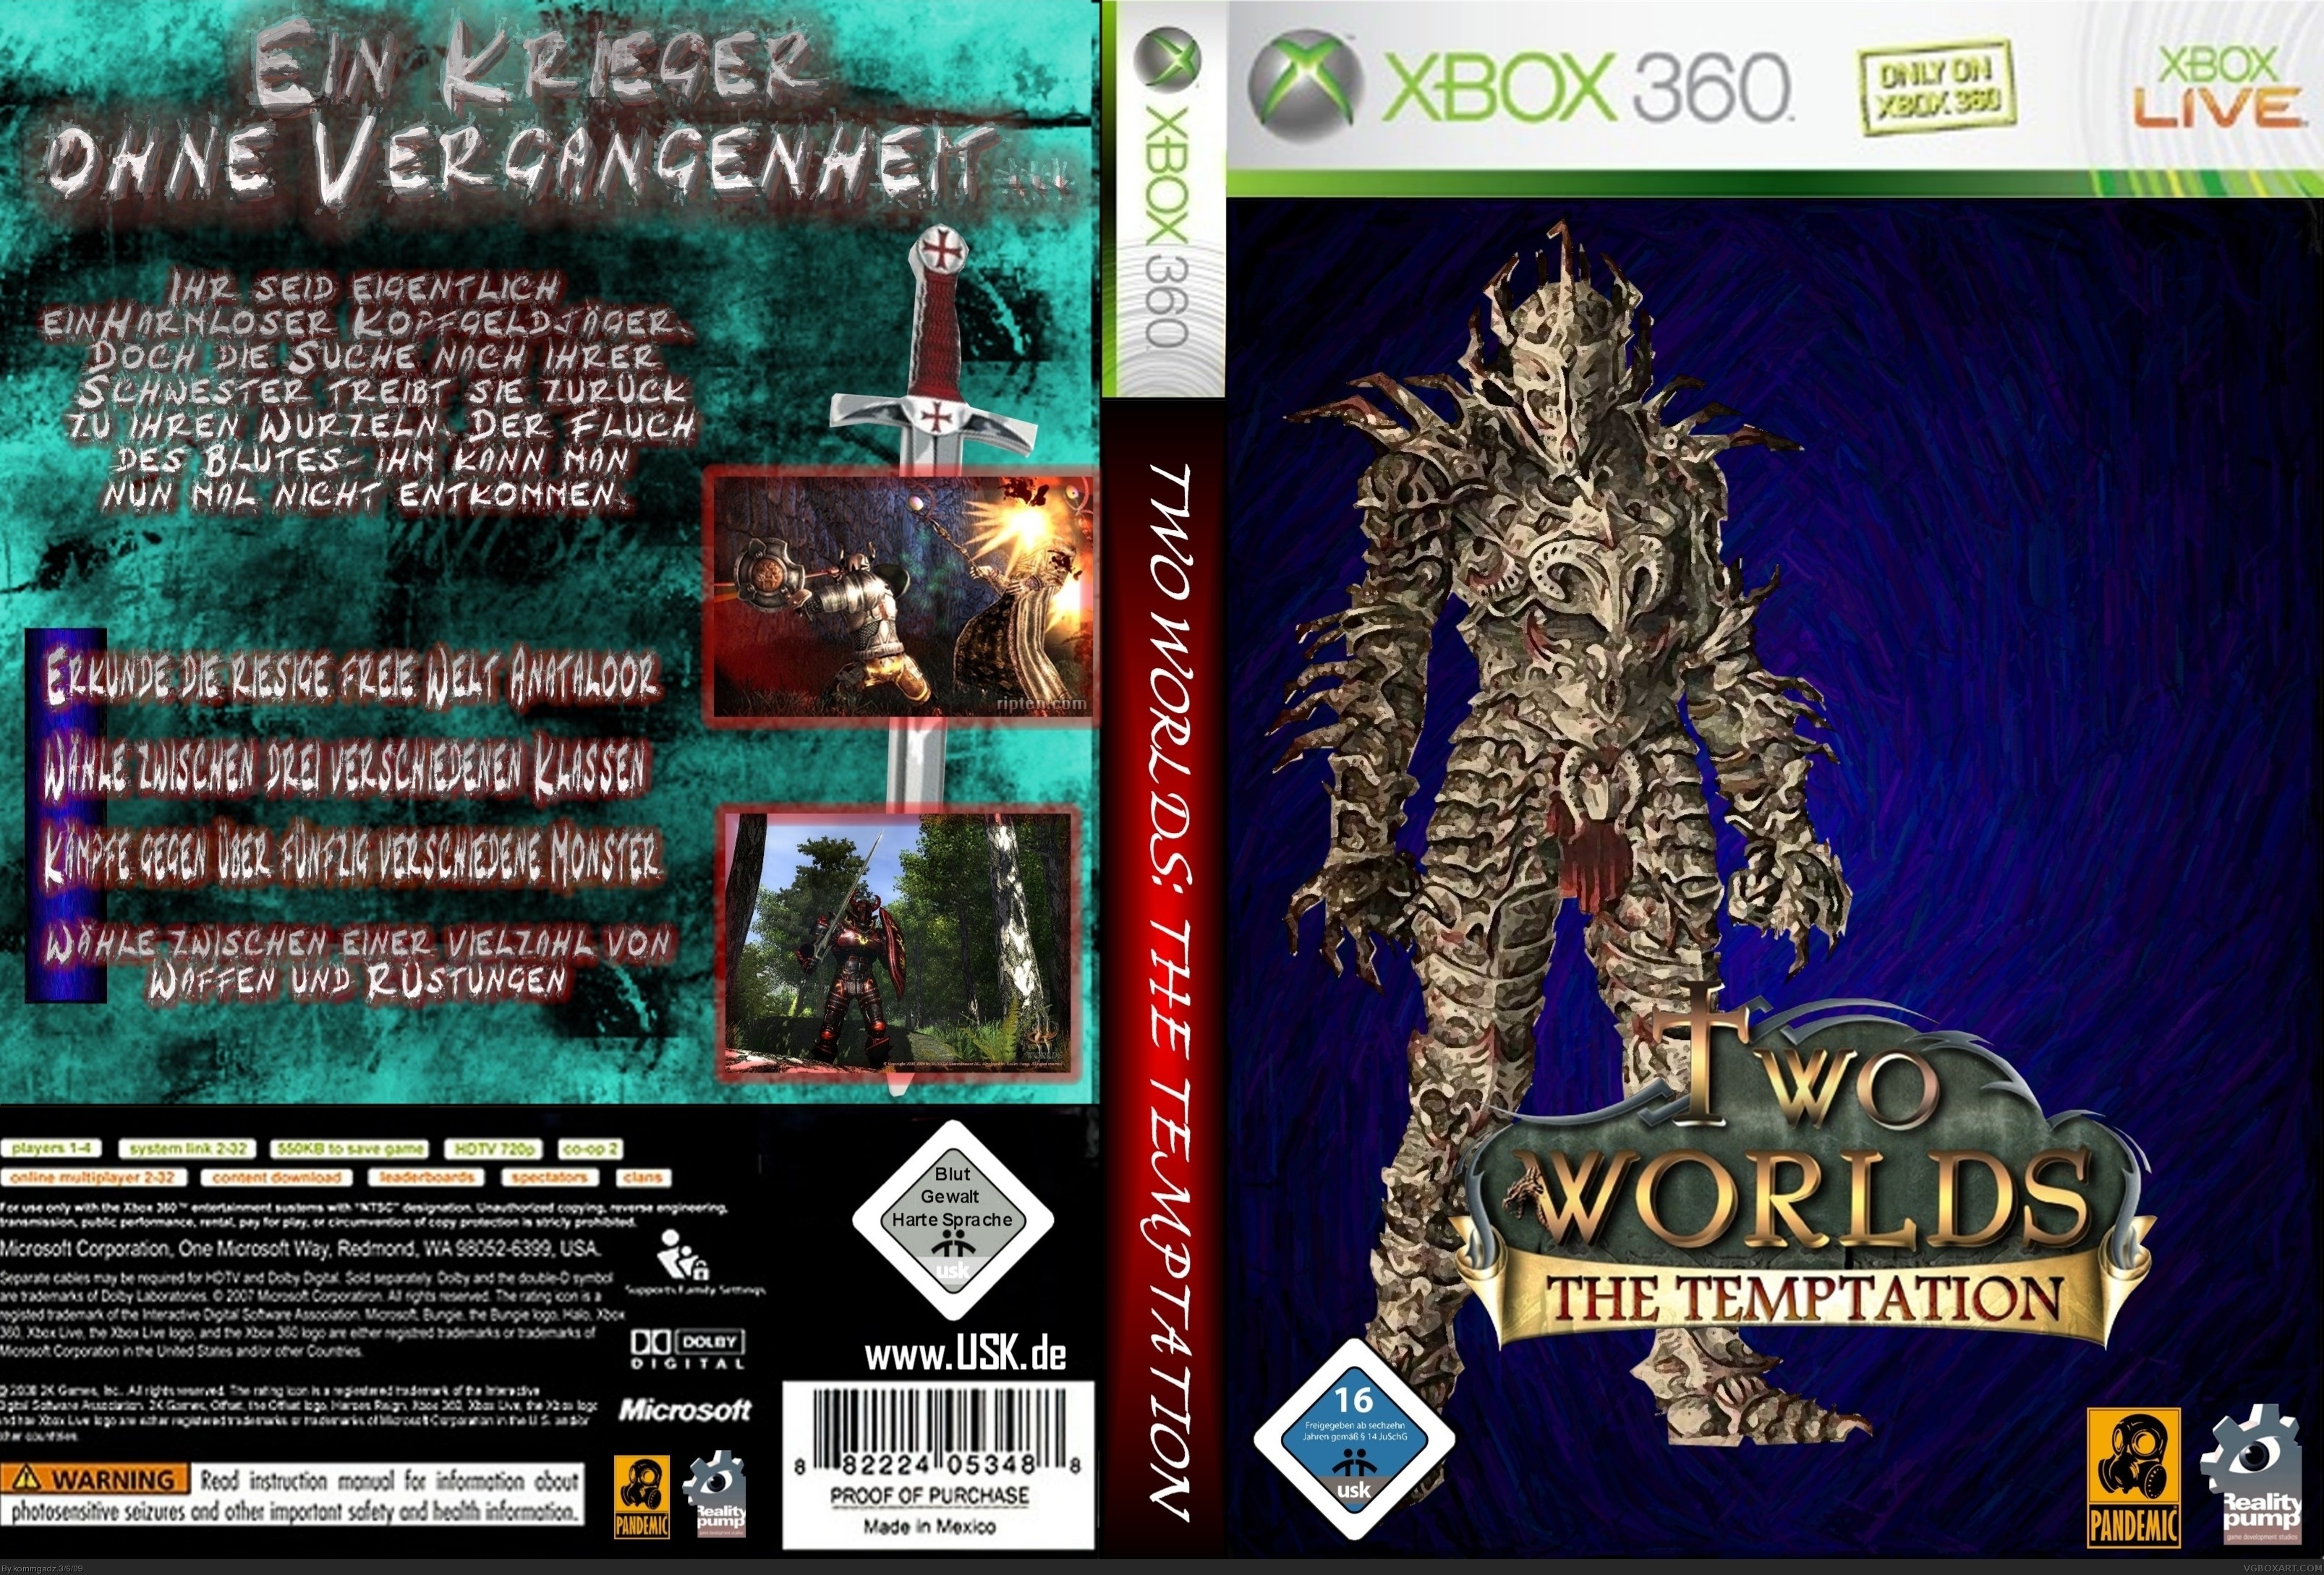 Two Worlds Temptation box cover